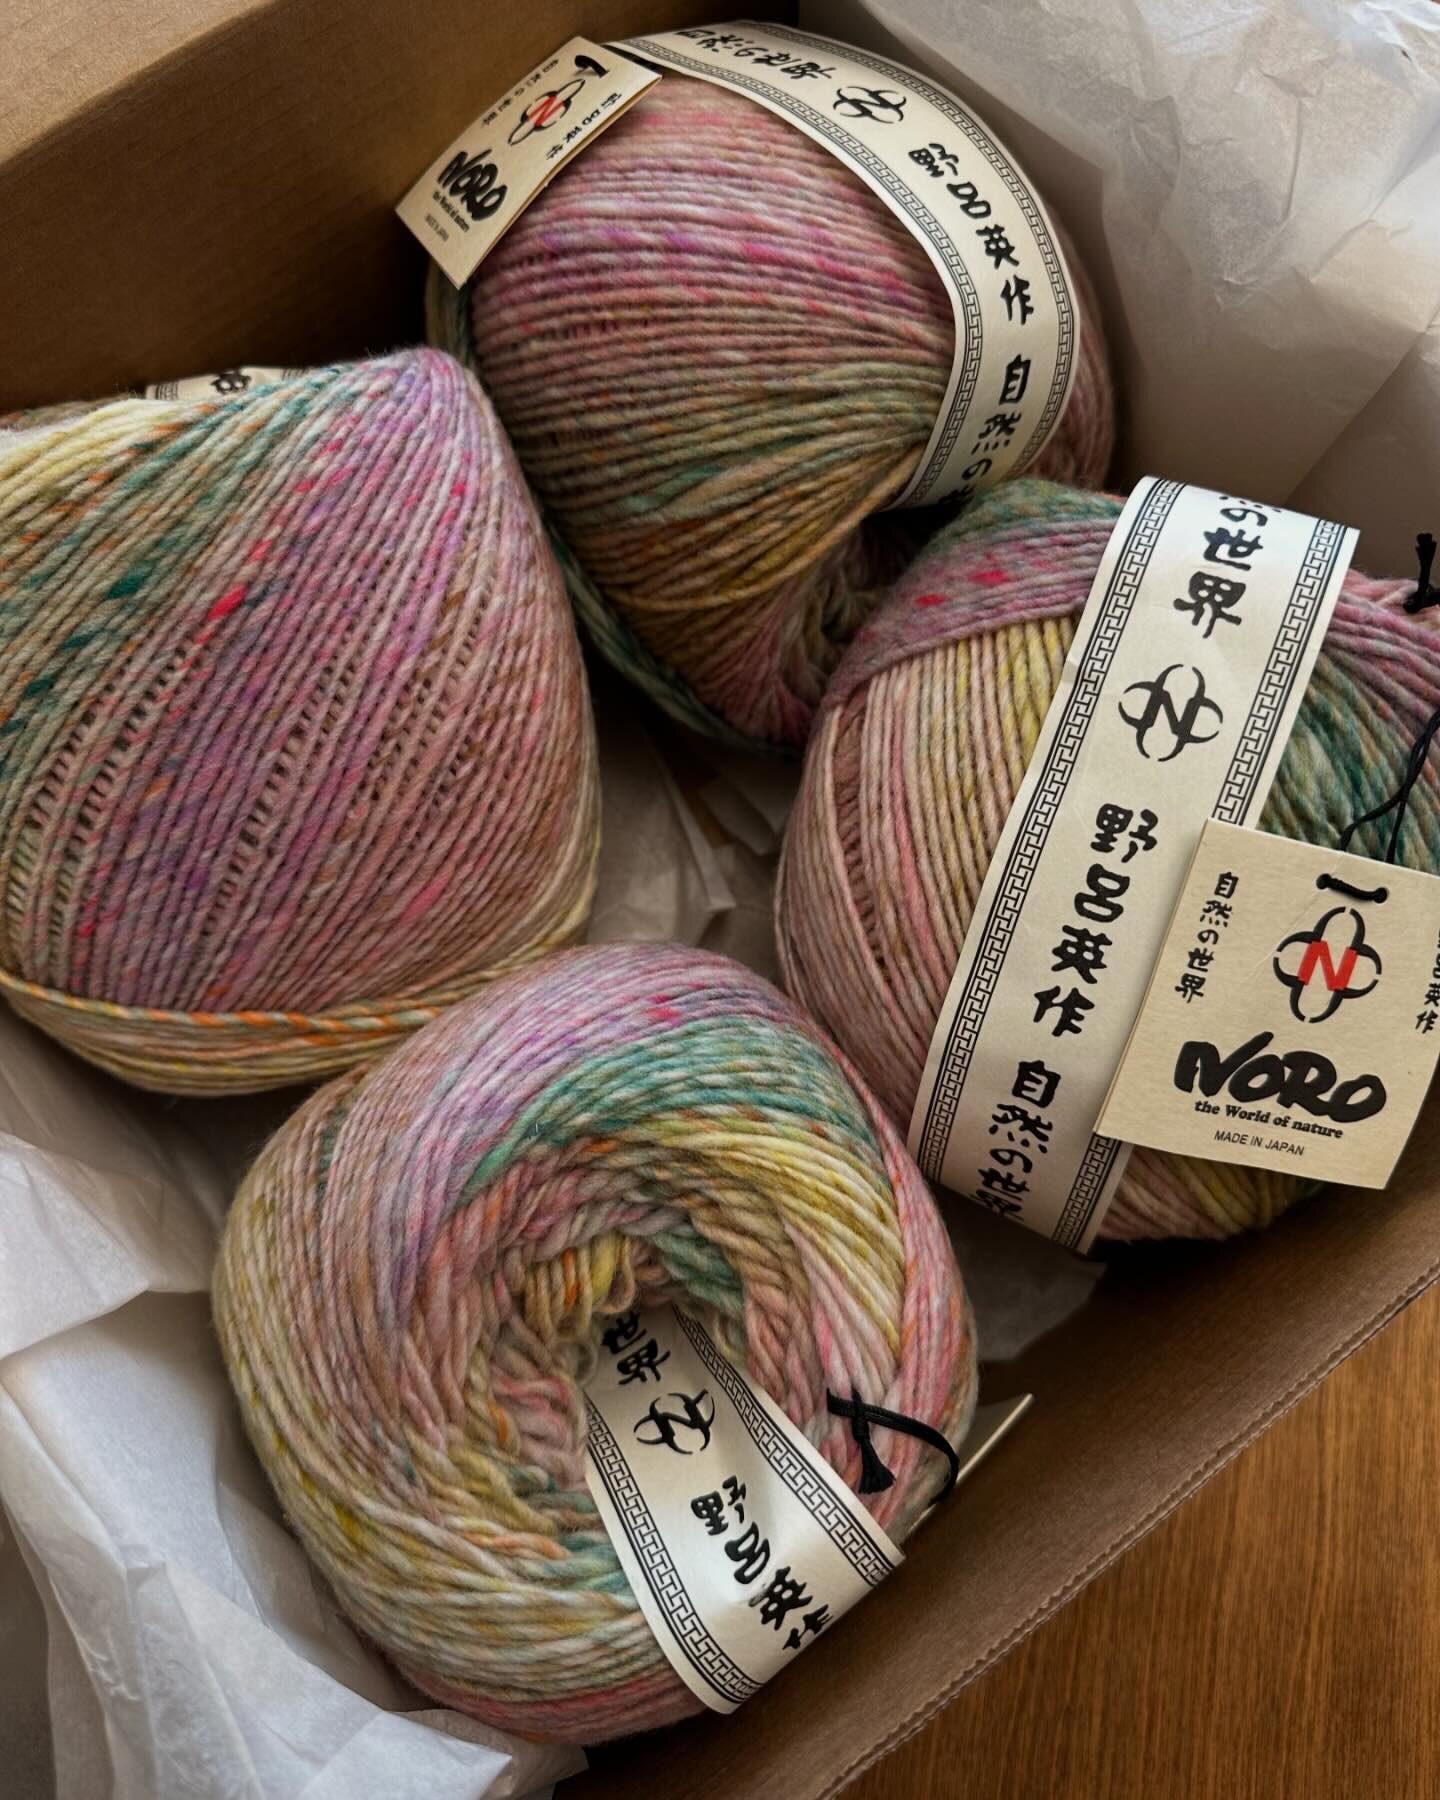 my birthday is on sunday so of course i used it as an excuse to buy myself more yarn ✨ i&rsquo;ve never knit with noro but this self-striping color is exactly the happy spring vibe i neeeed!! 🌸💖🫐💚☀️🌷🍊